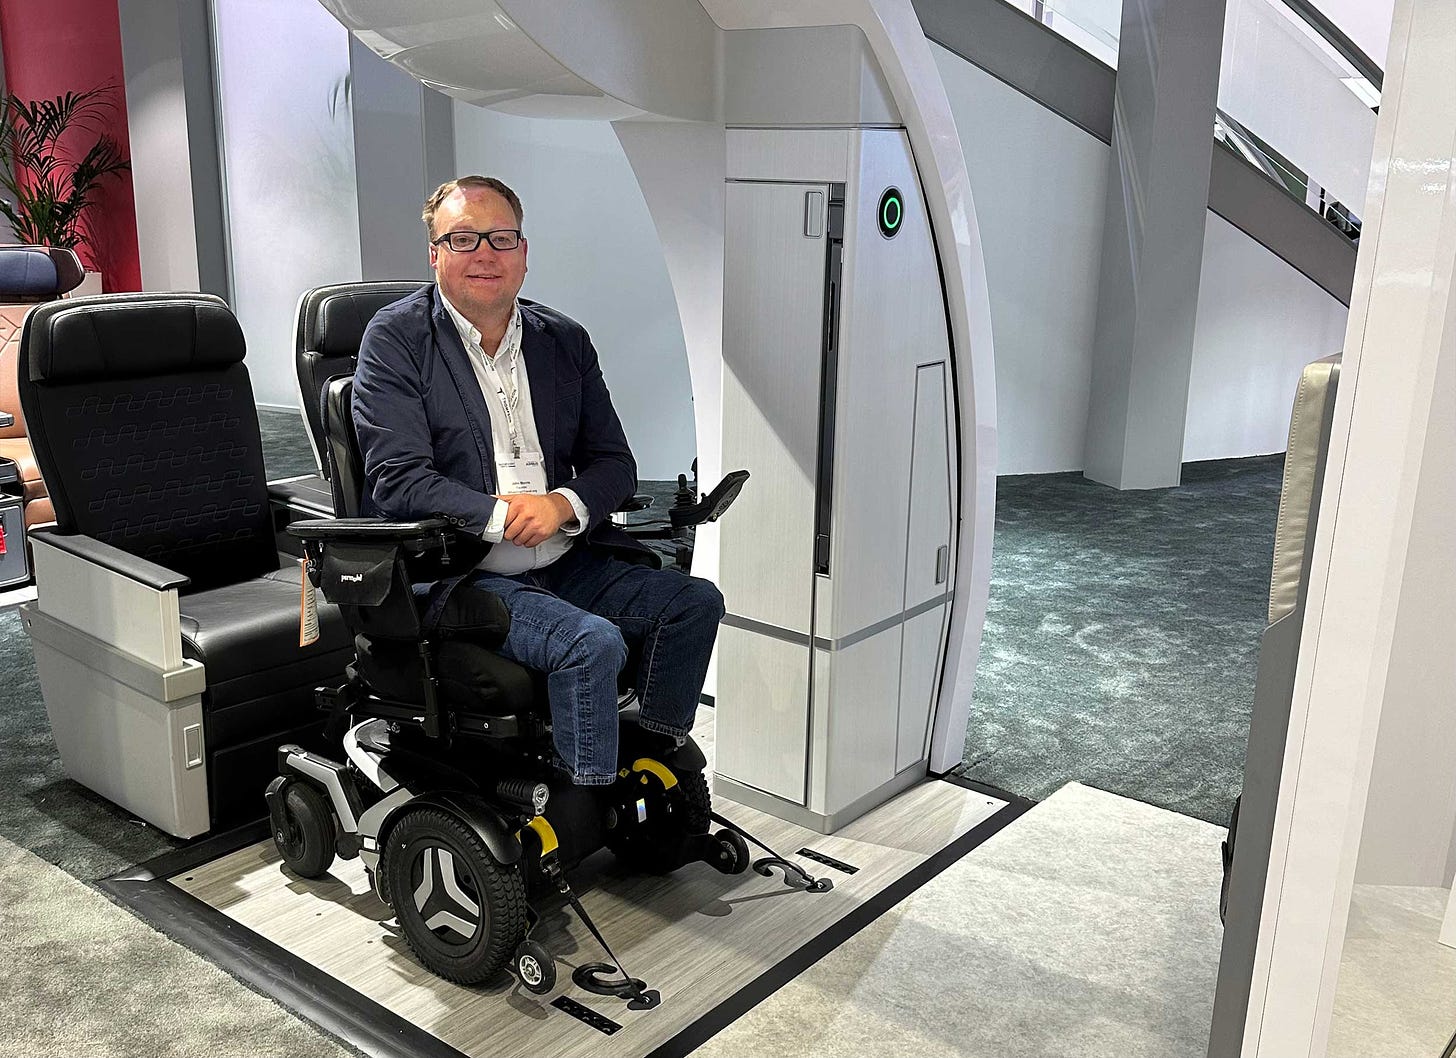 John seated in his wheelchair onboard an airplane mock-up with his chair secured to the floor using straps.